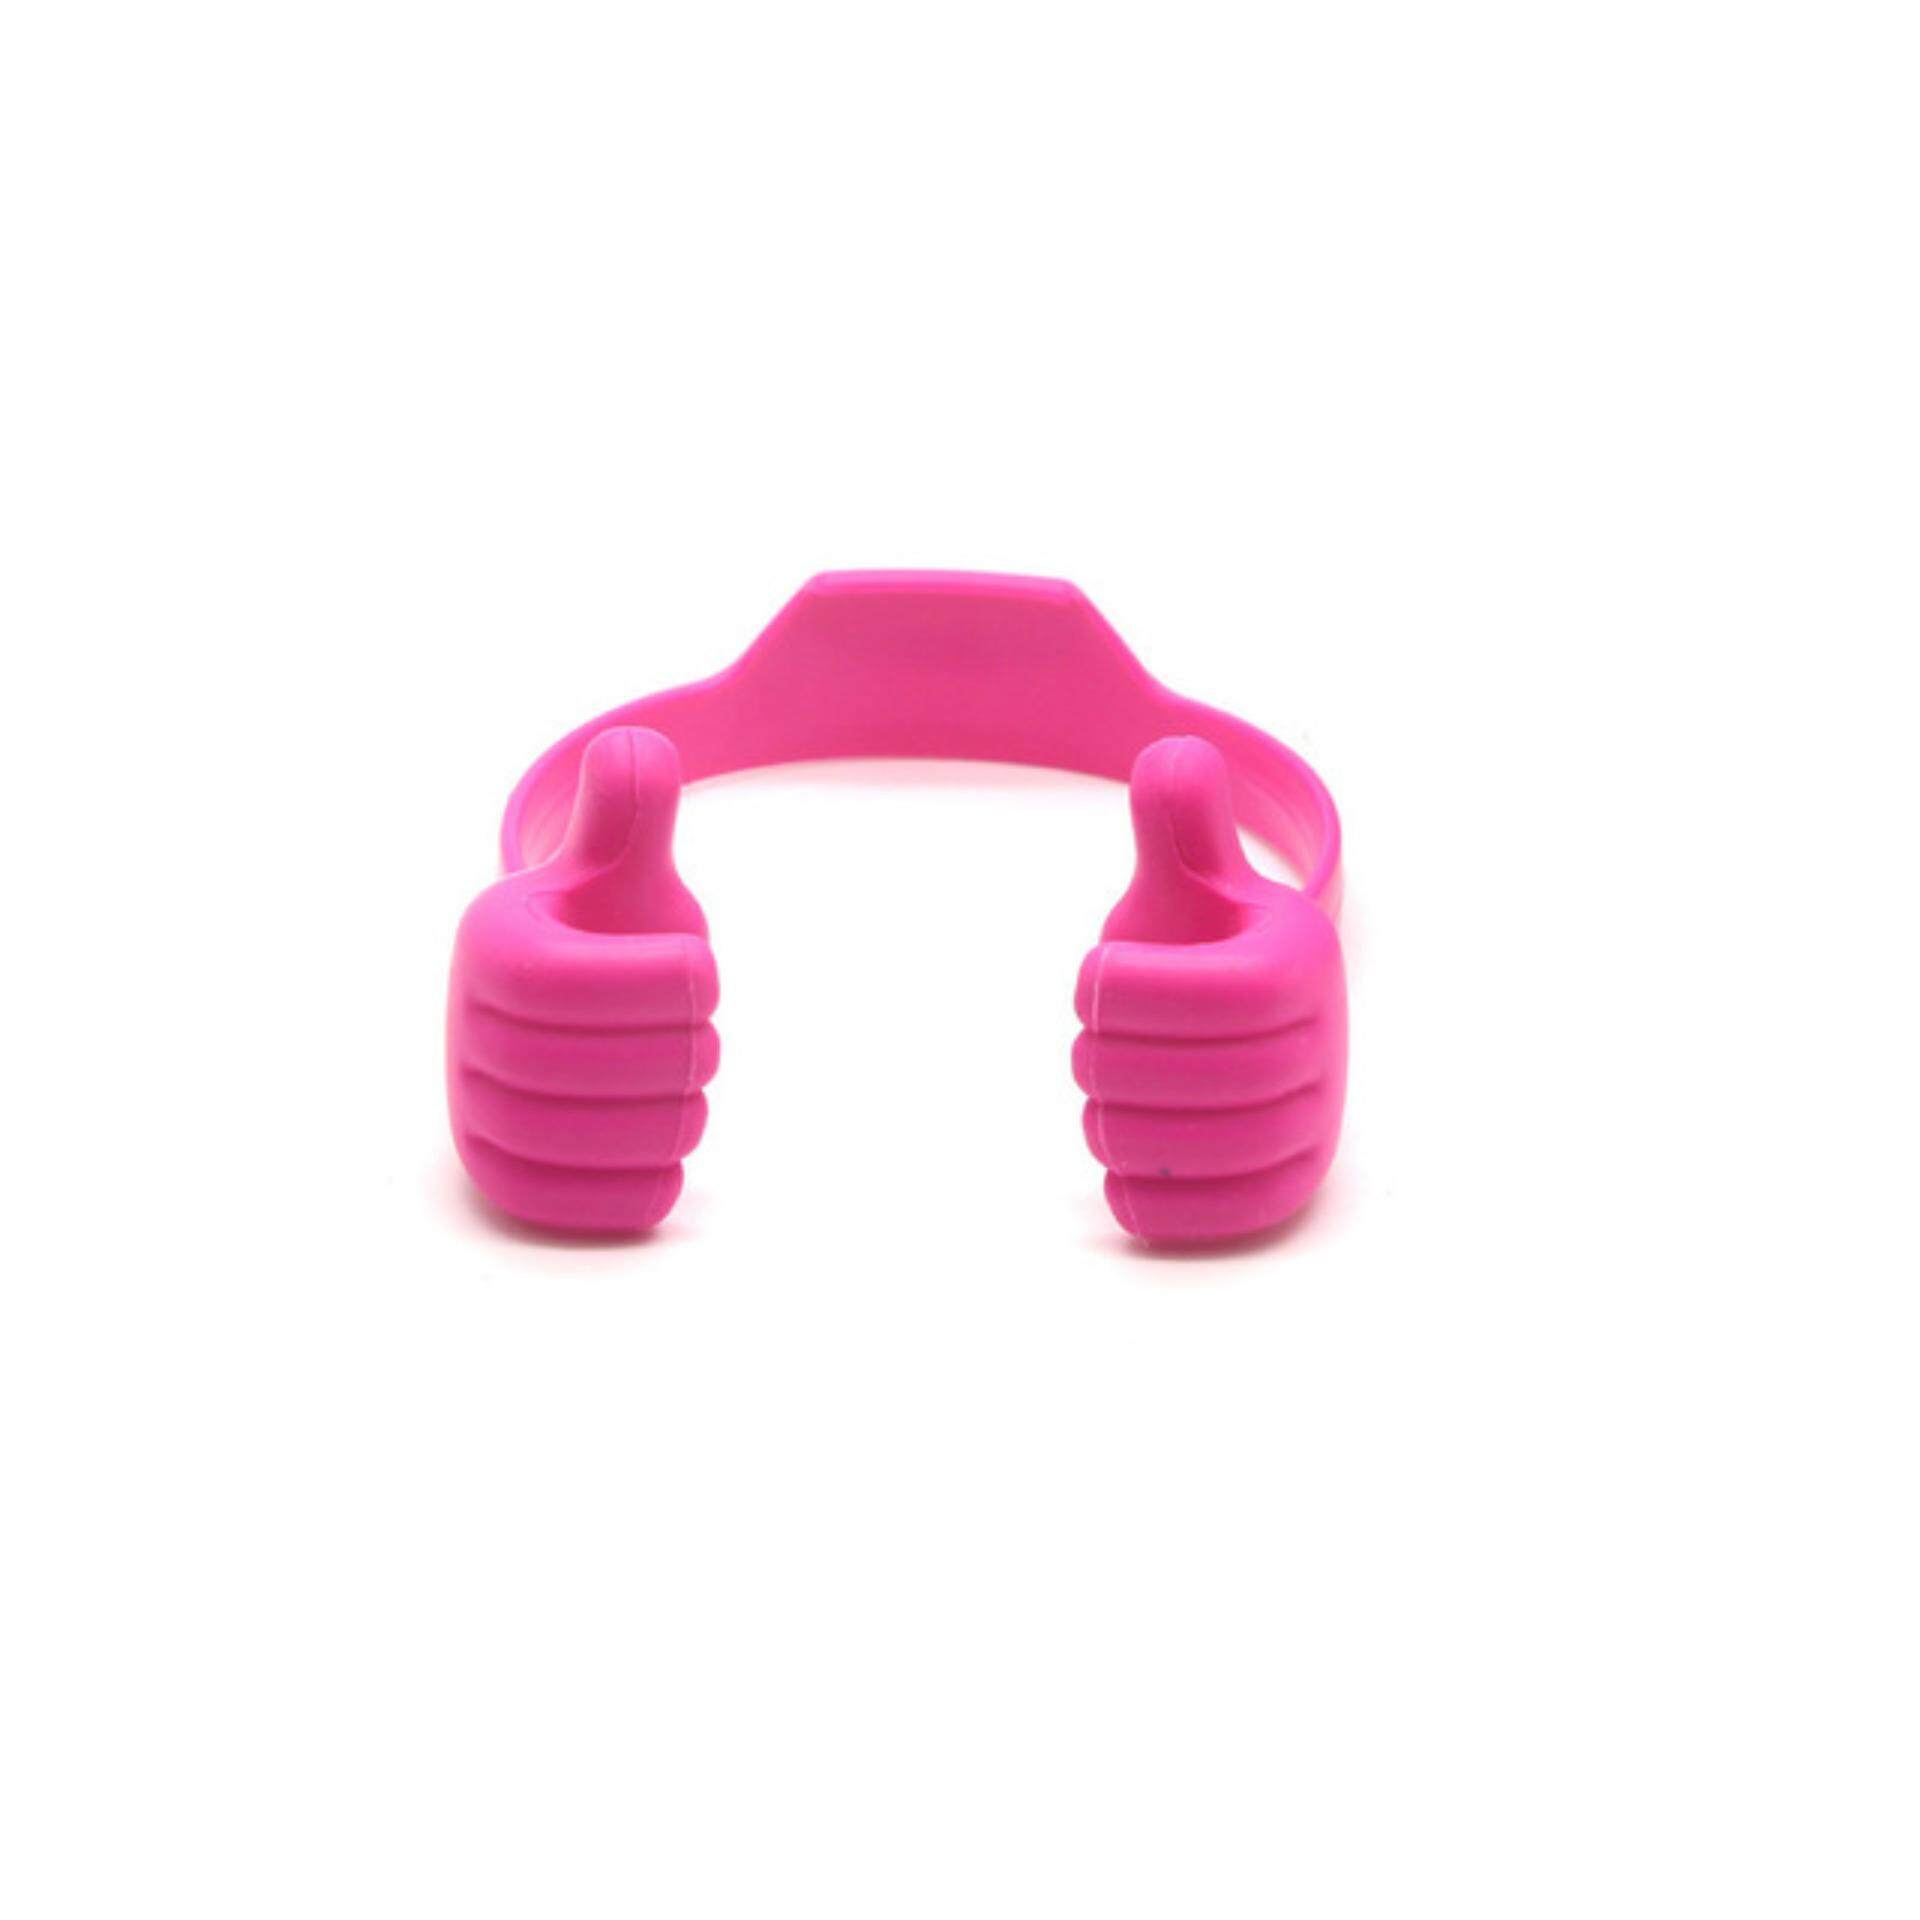 Cute Fun Thumbs Up Adjustable Flexible Cell Phone Holder Tablet